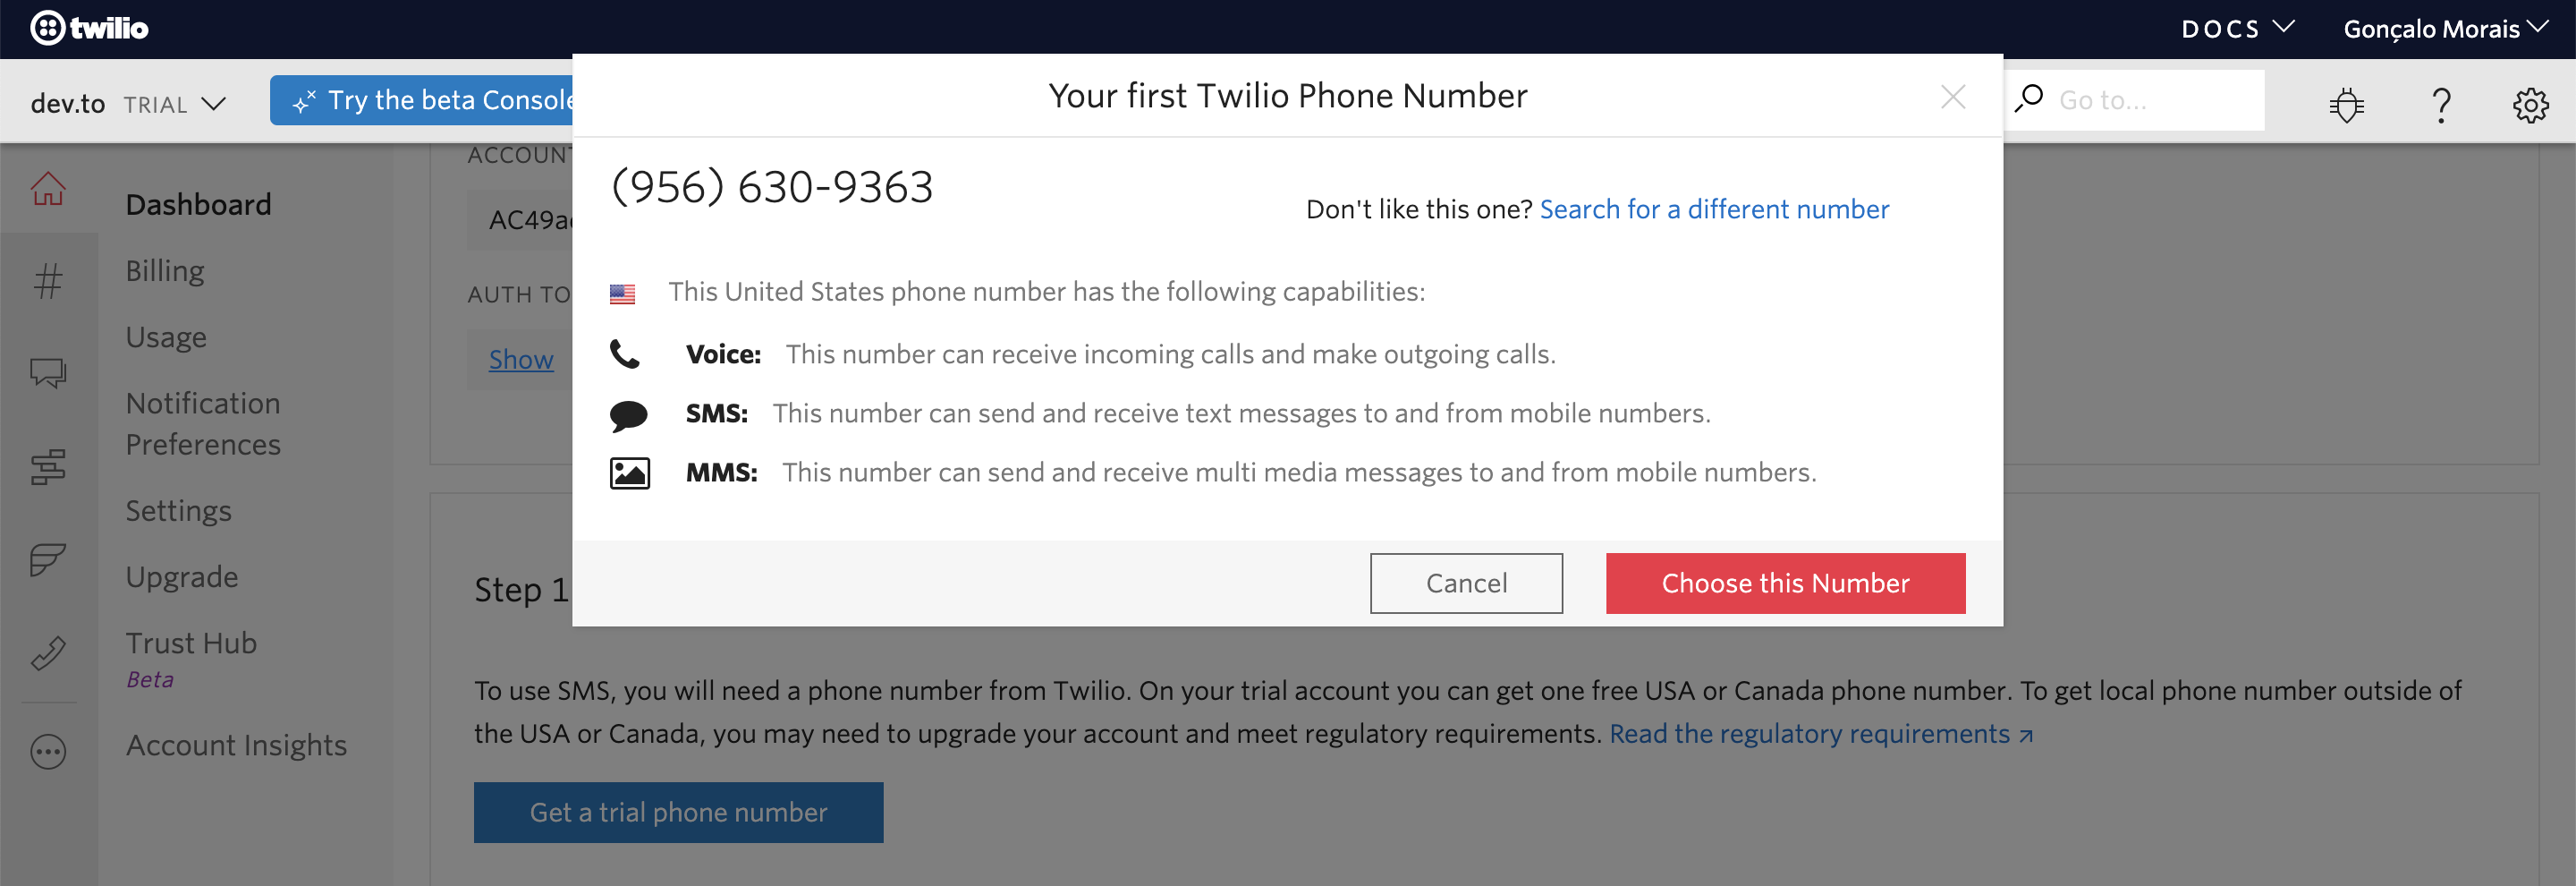 Modal with a suggested phone number